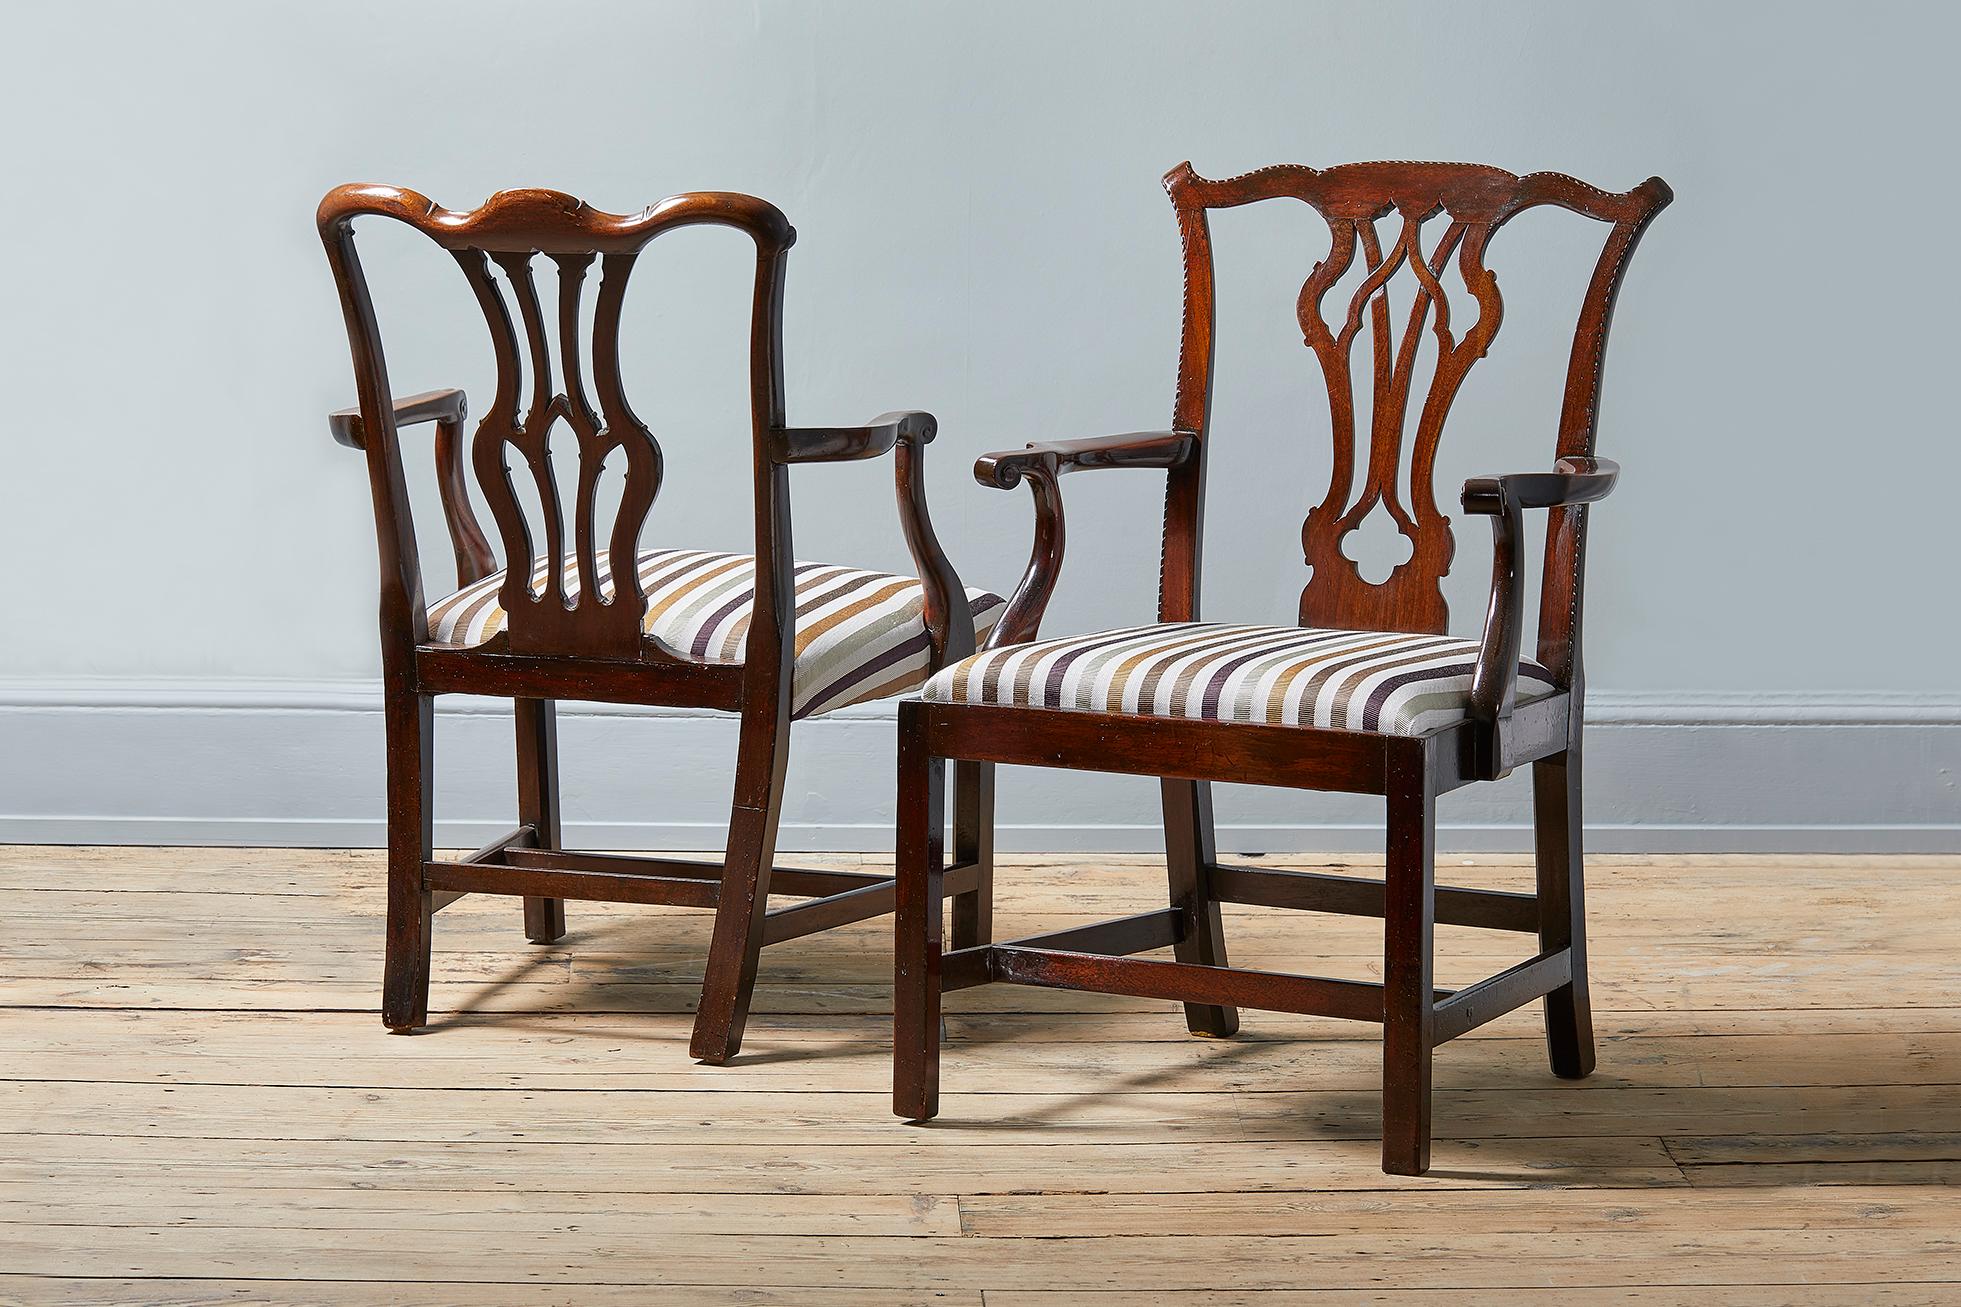 Two George II armchairs in the manner of Thomas Chippendale. Both dating from circa 1750, with mahogany frames, latticed splats and carved decor. The seats of both chairs recently reupholstered in Hermès ottoman fabric.